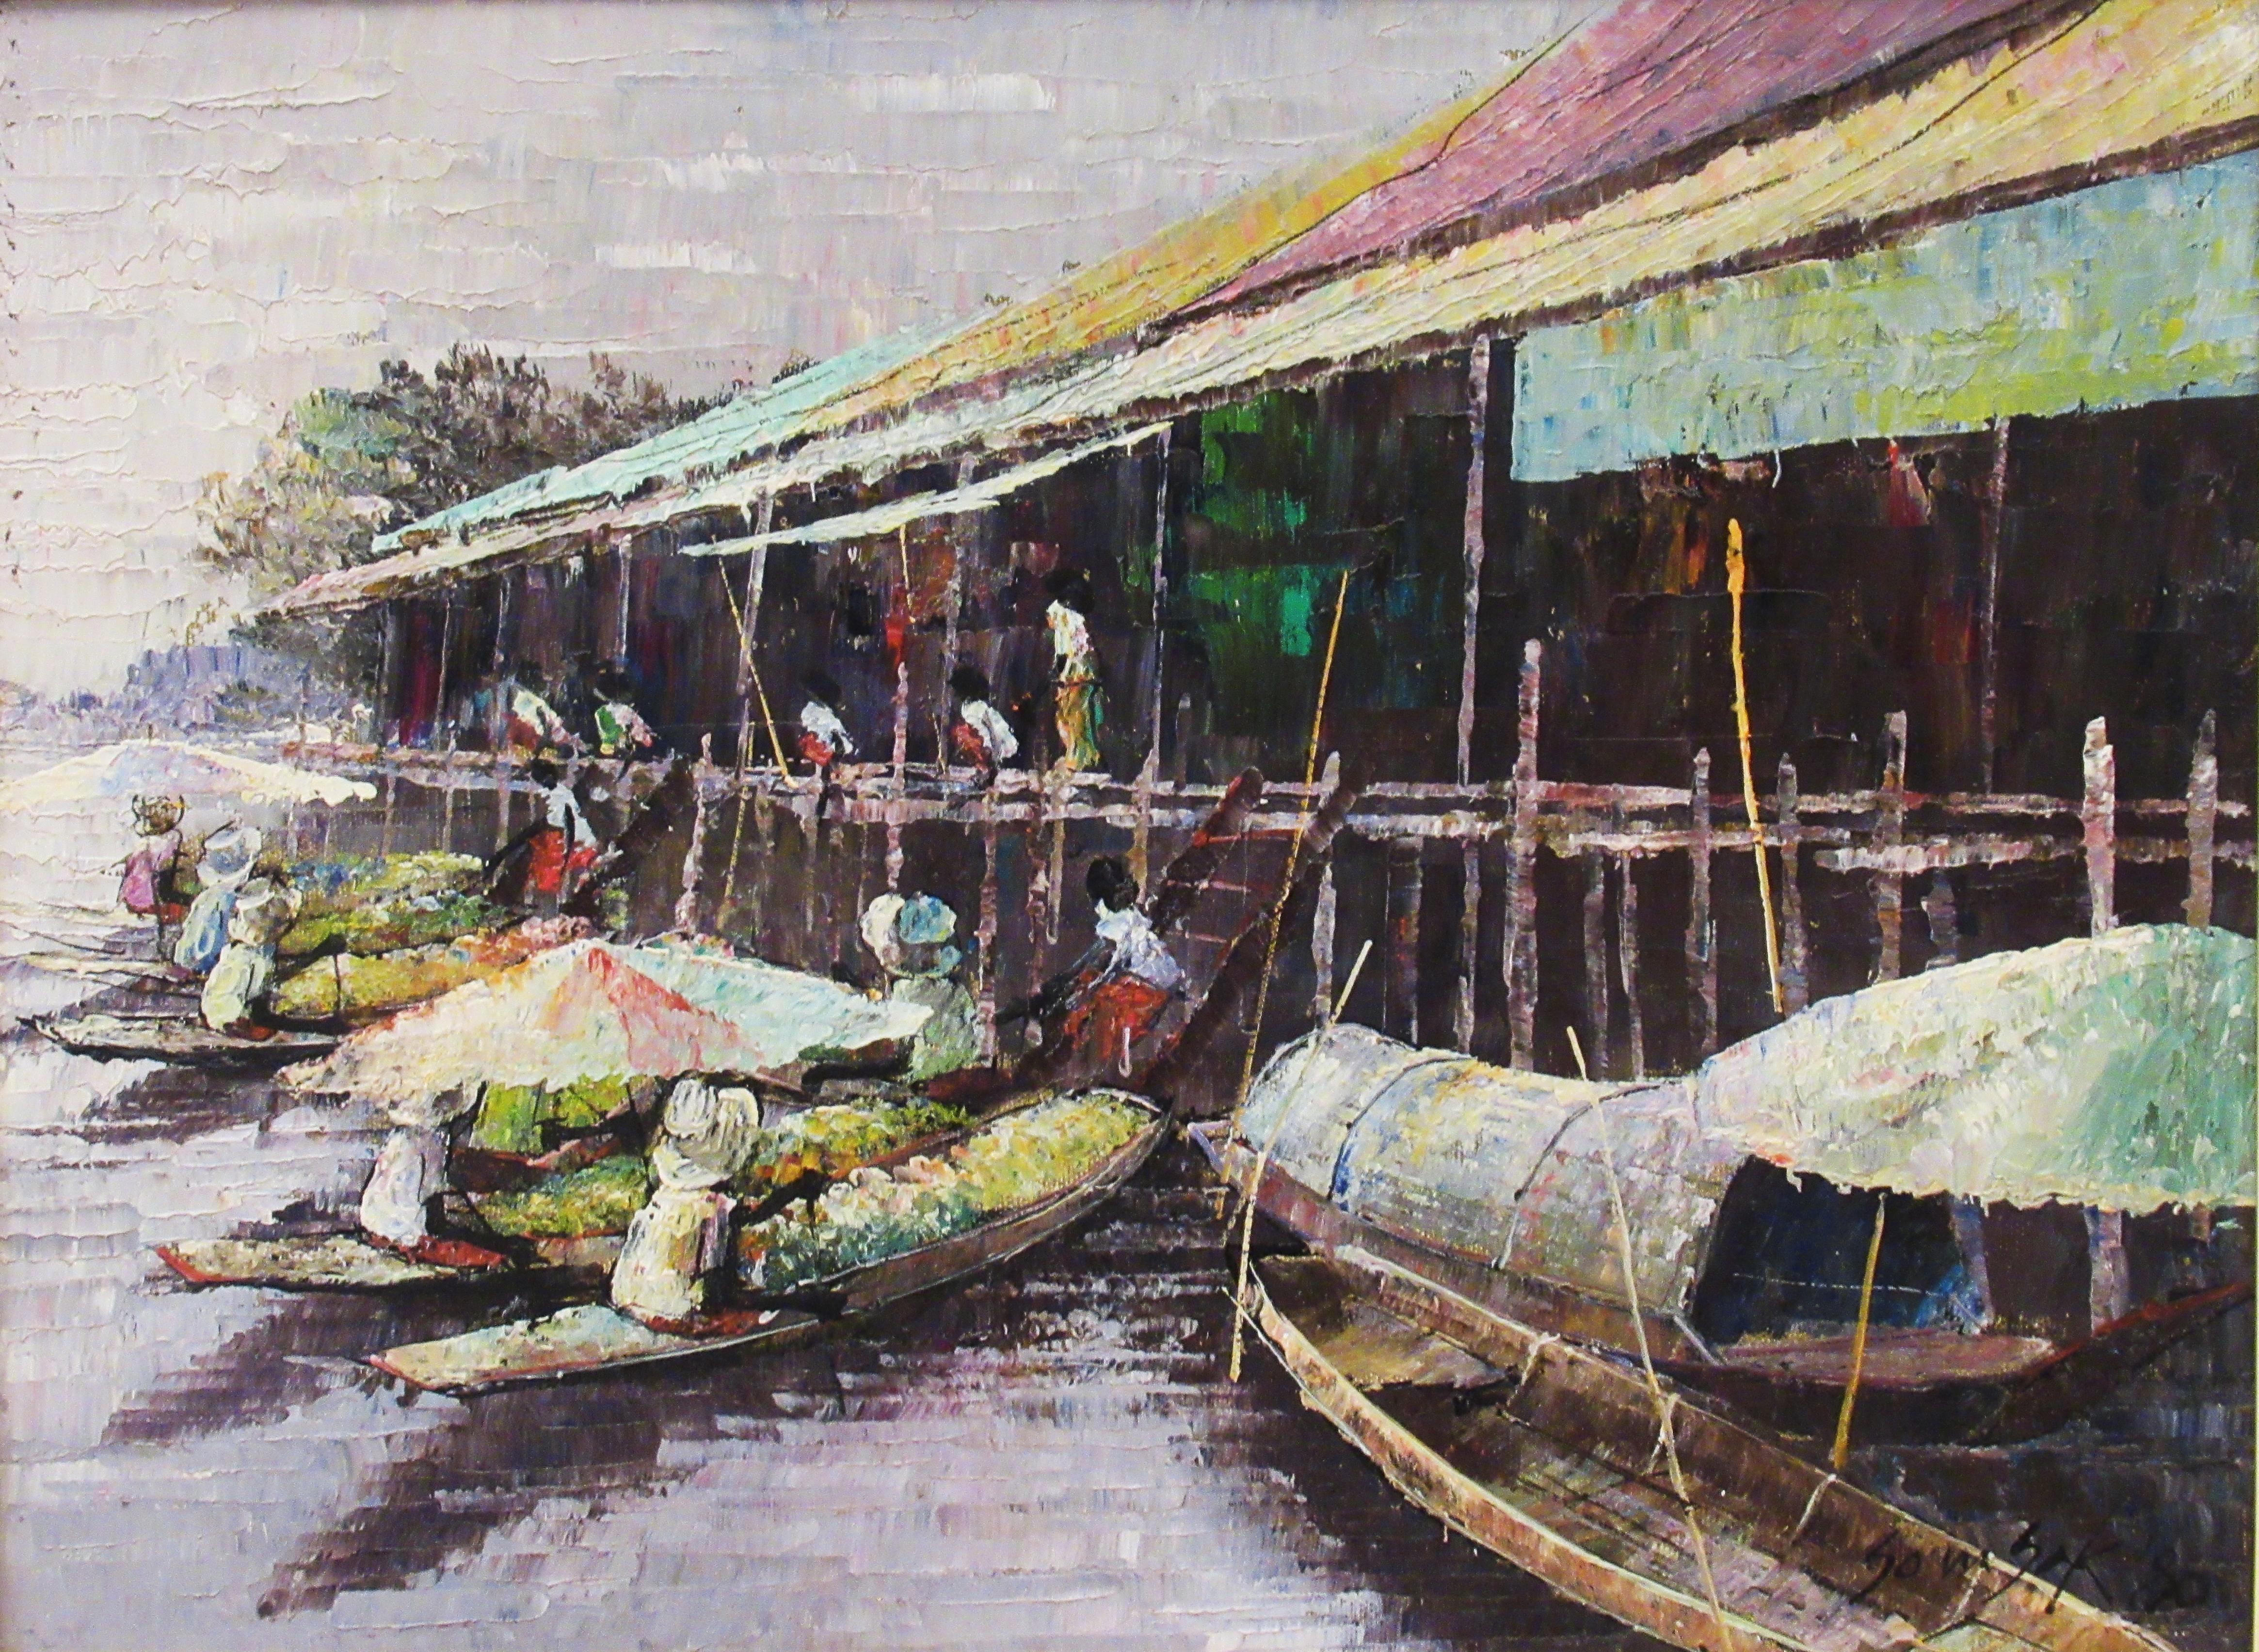 Floating Market, Thailand - Painting by Somsak Chowtadapong